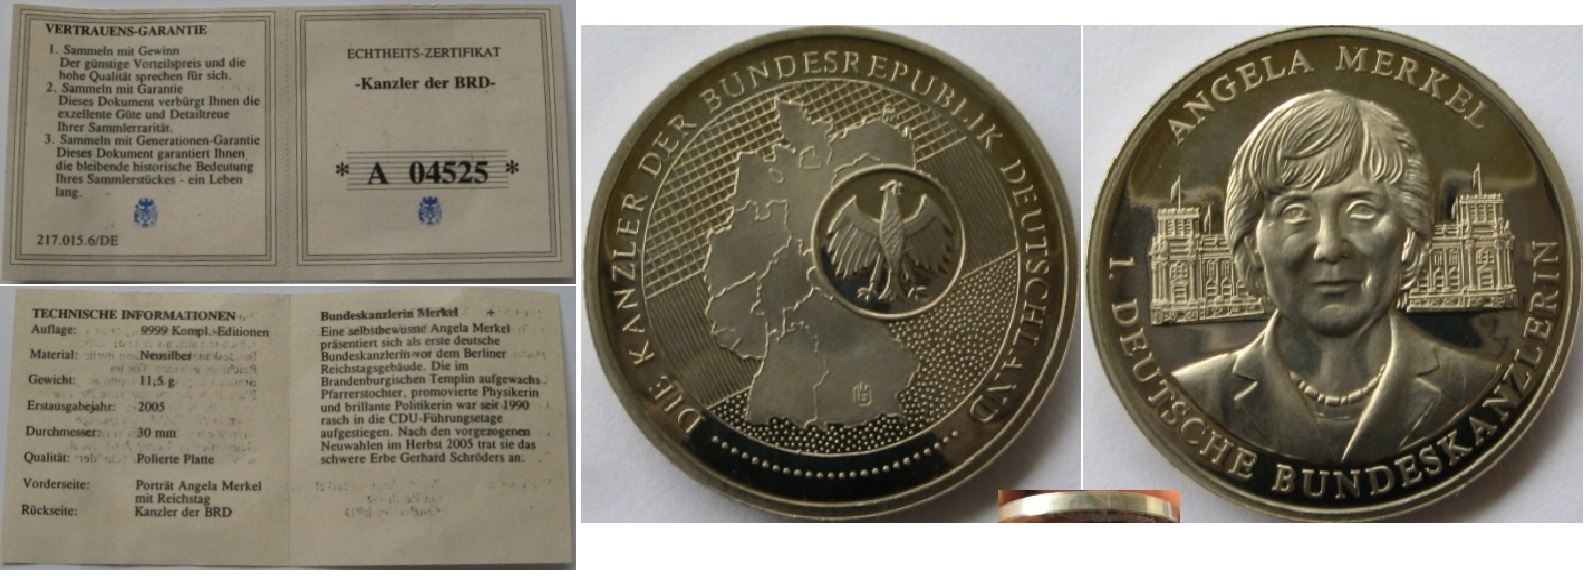  2005, Medal - Portrait of Chancellor of the FRG Angela Merkel with Reichstag   